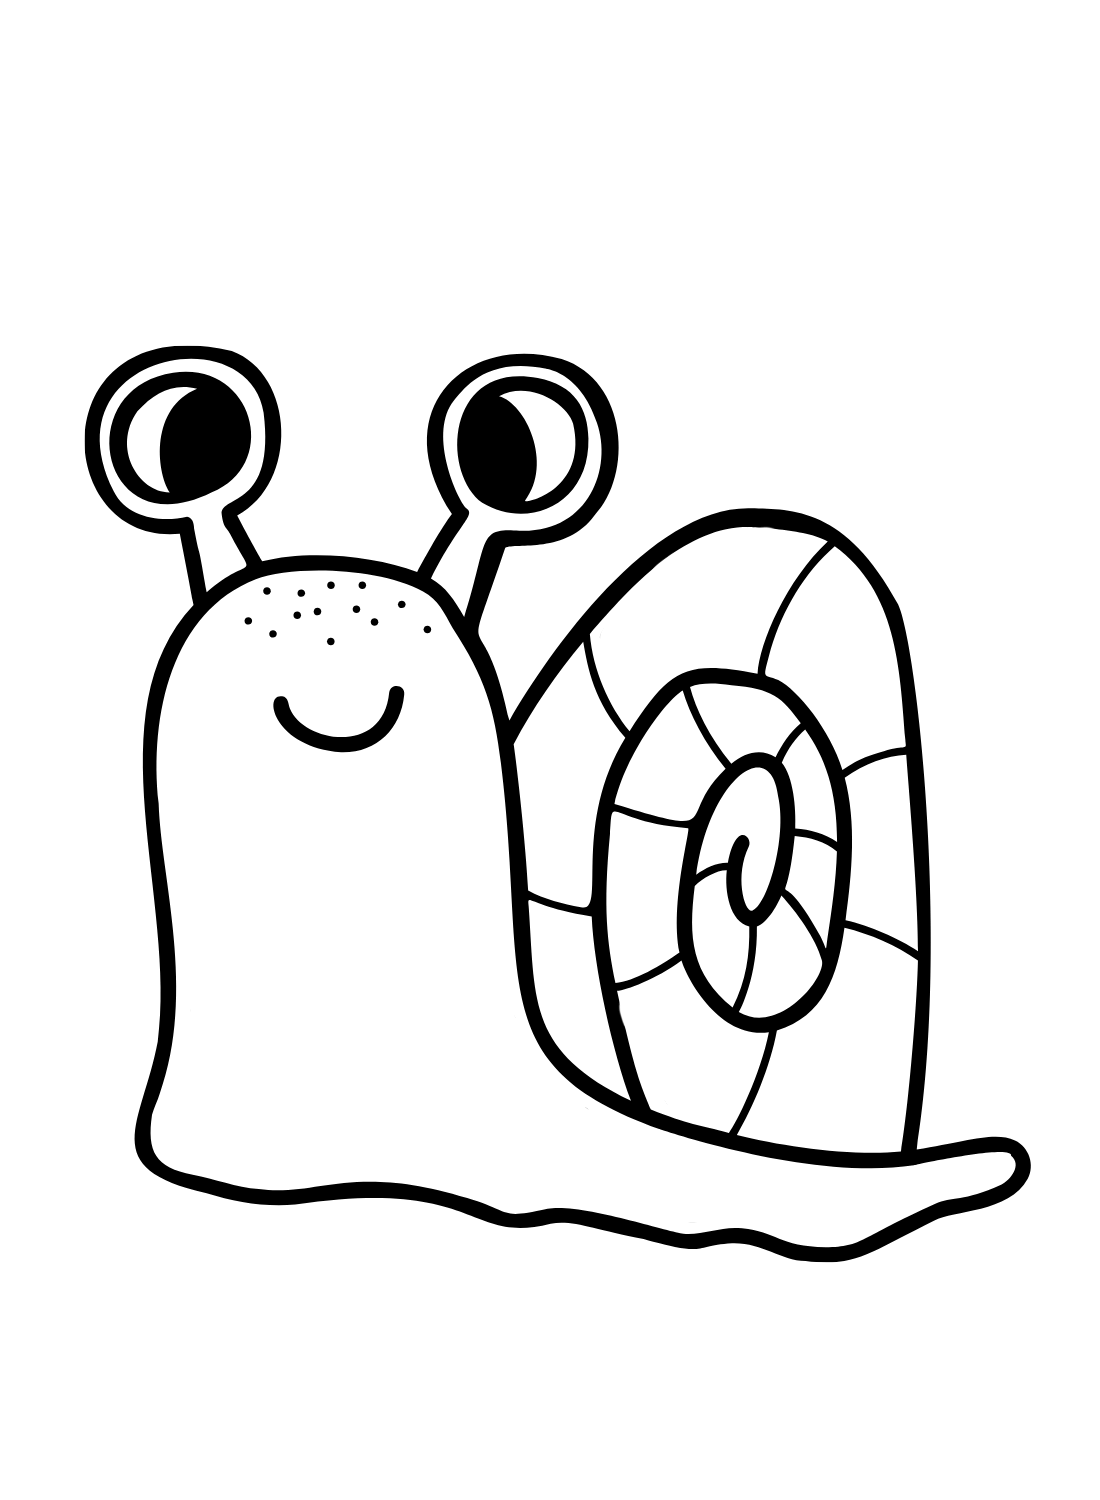 Snail to Print from Snail